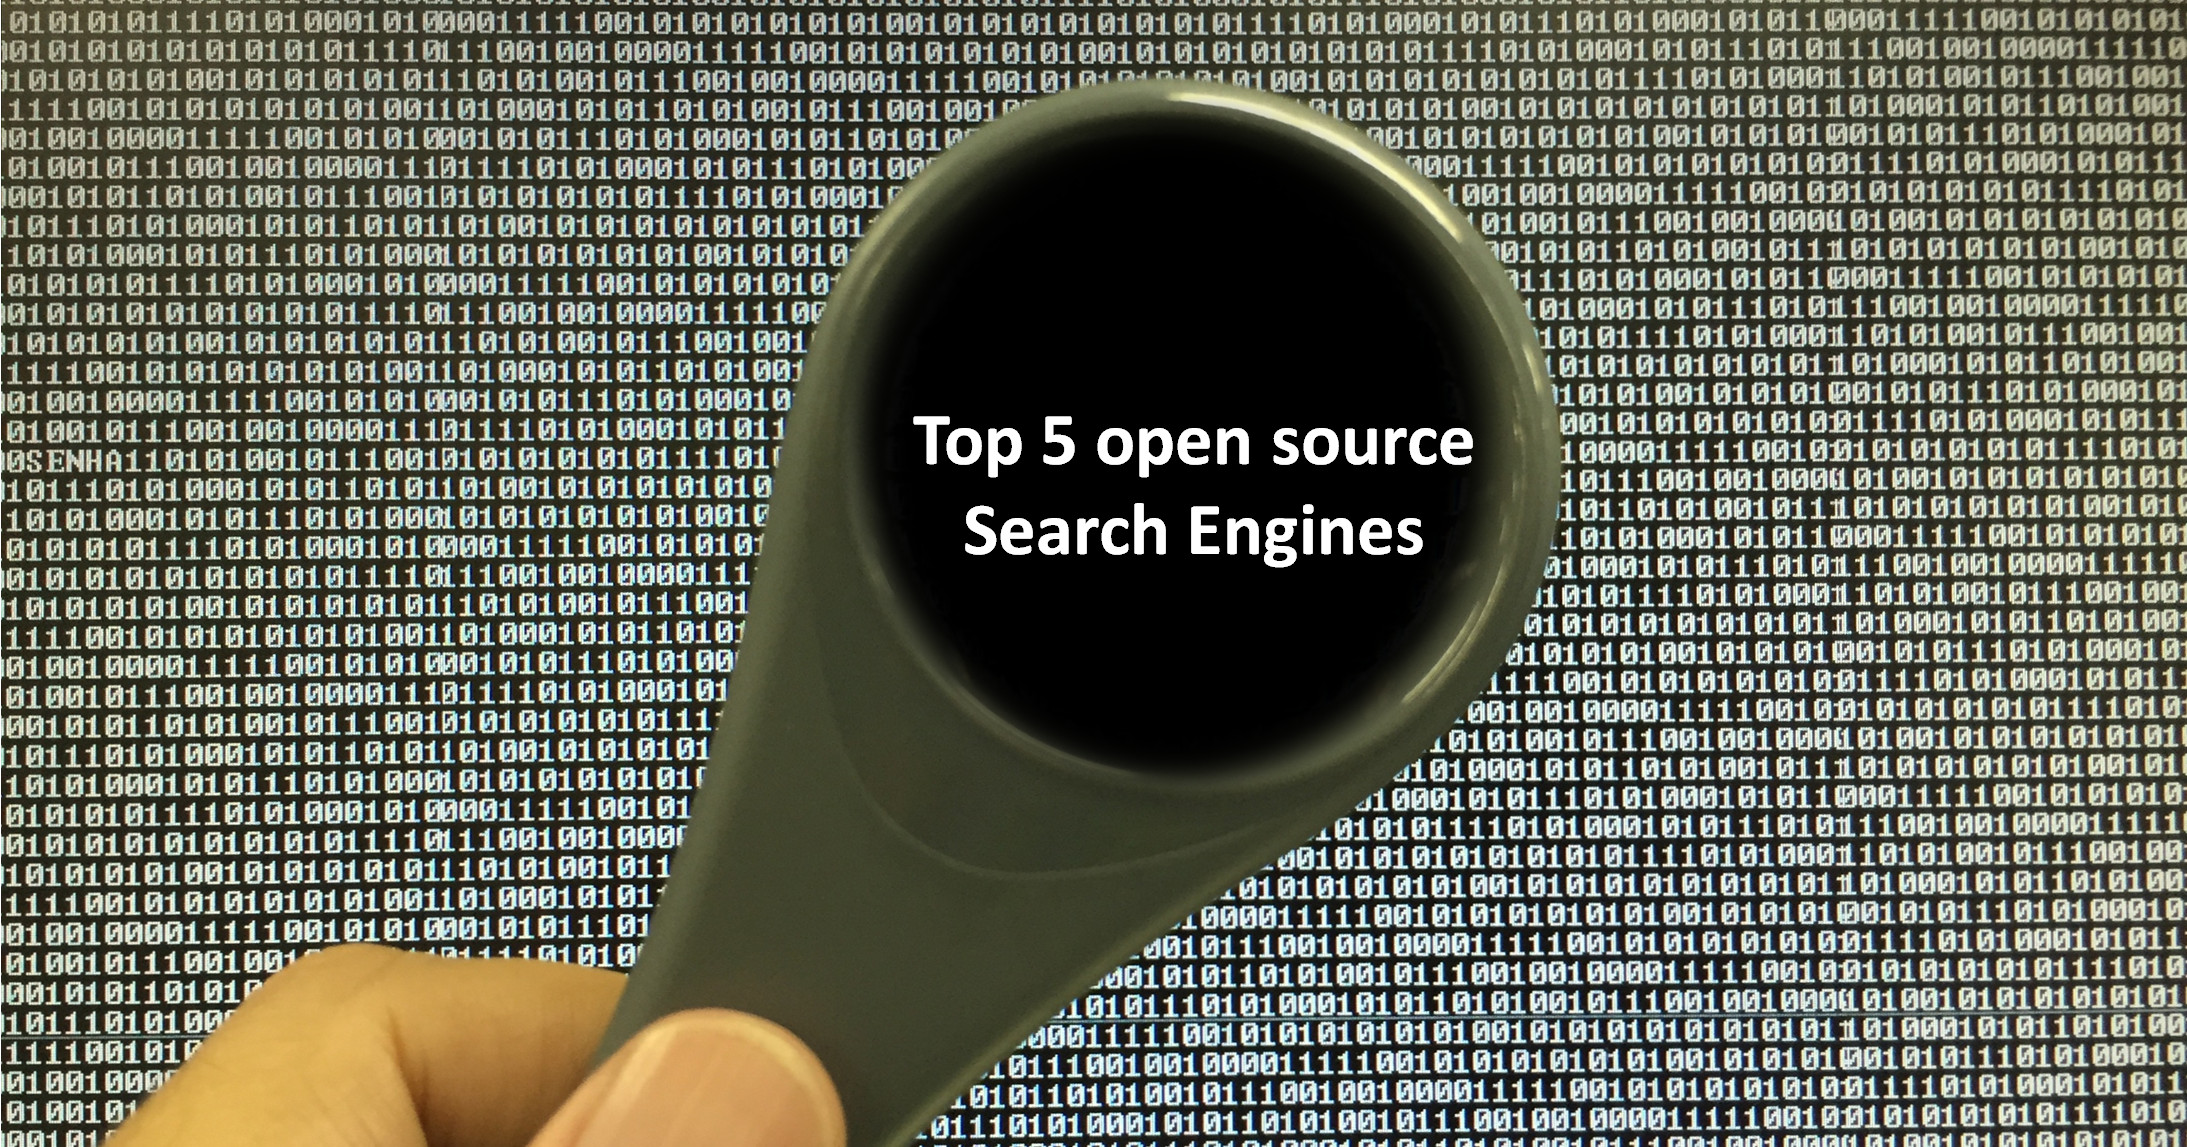 Top 5 Open Source Search Engines - Image 1